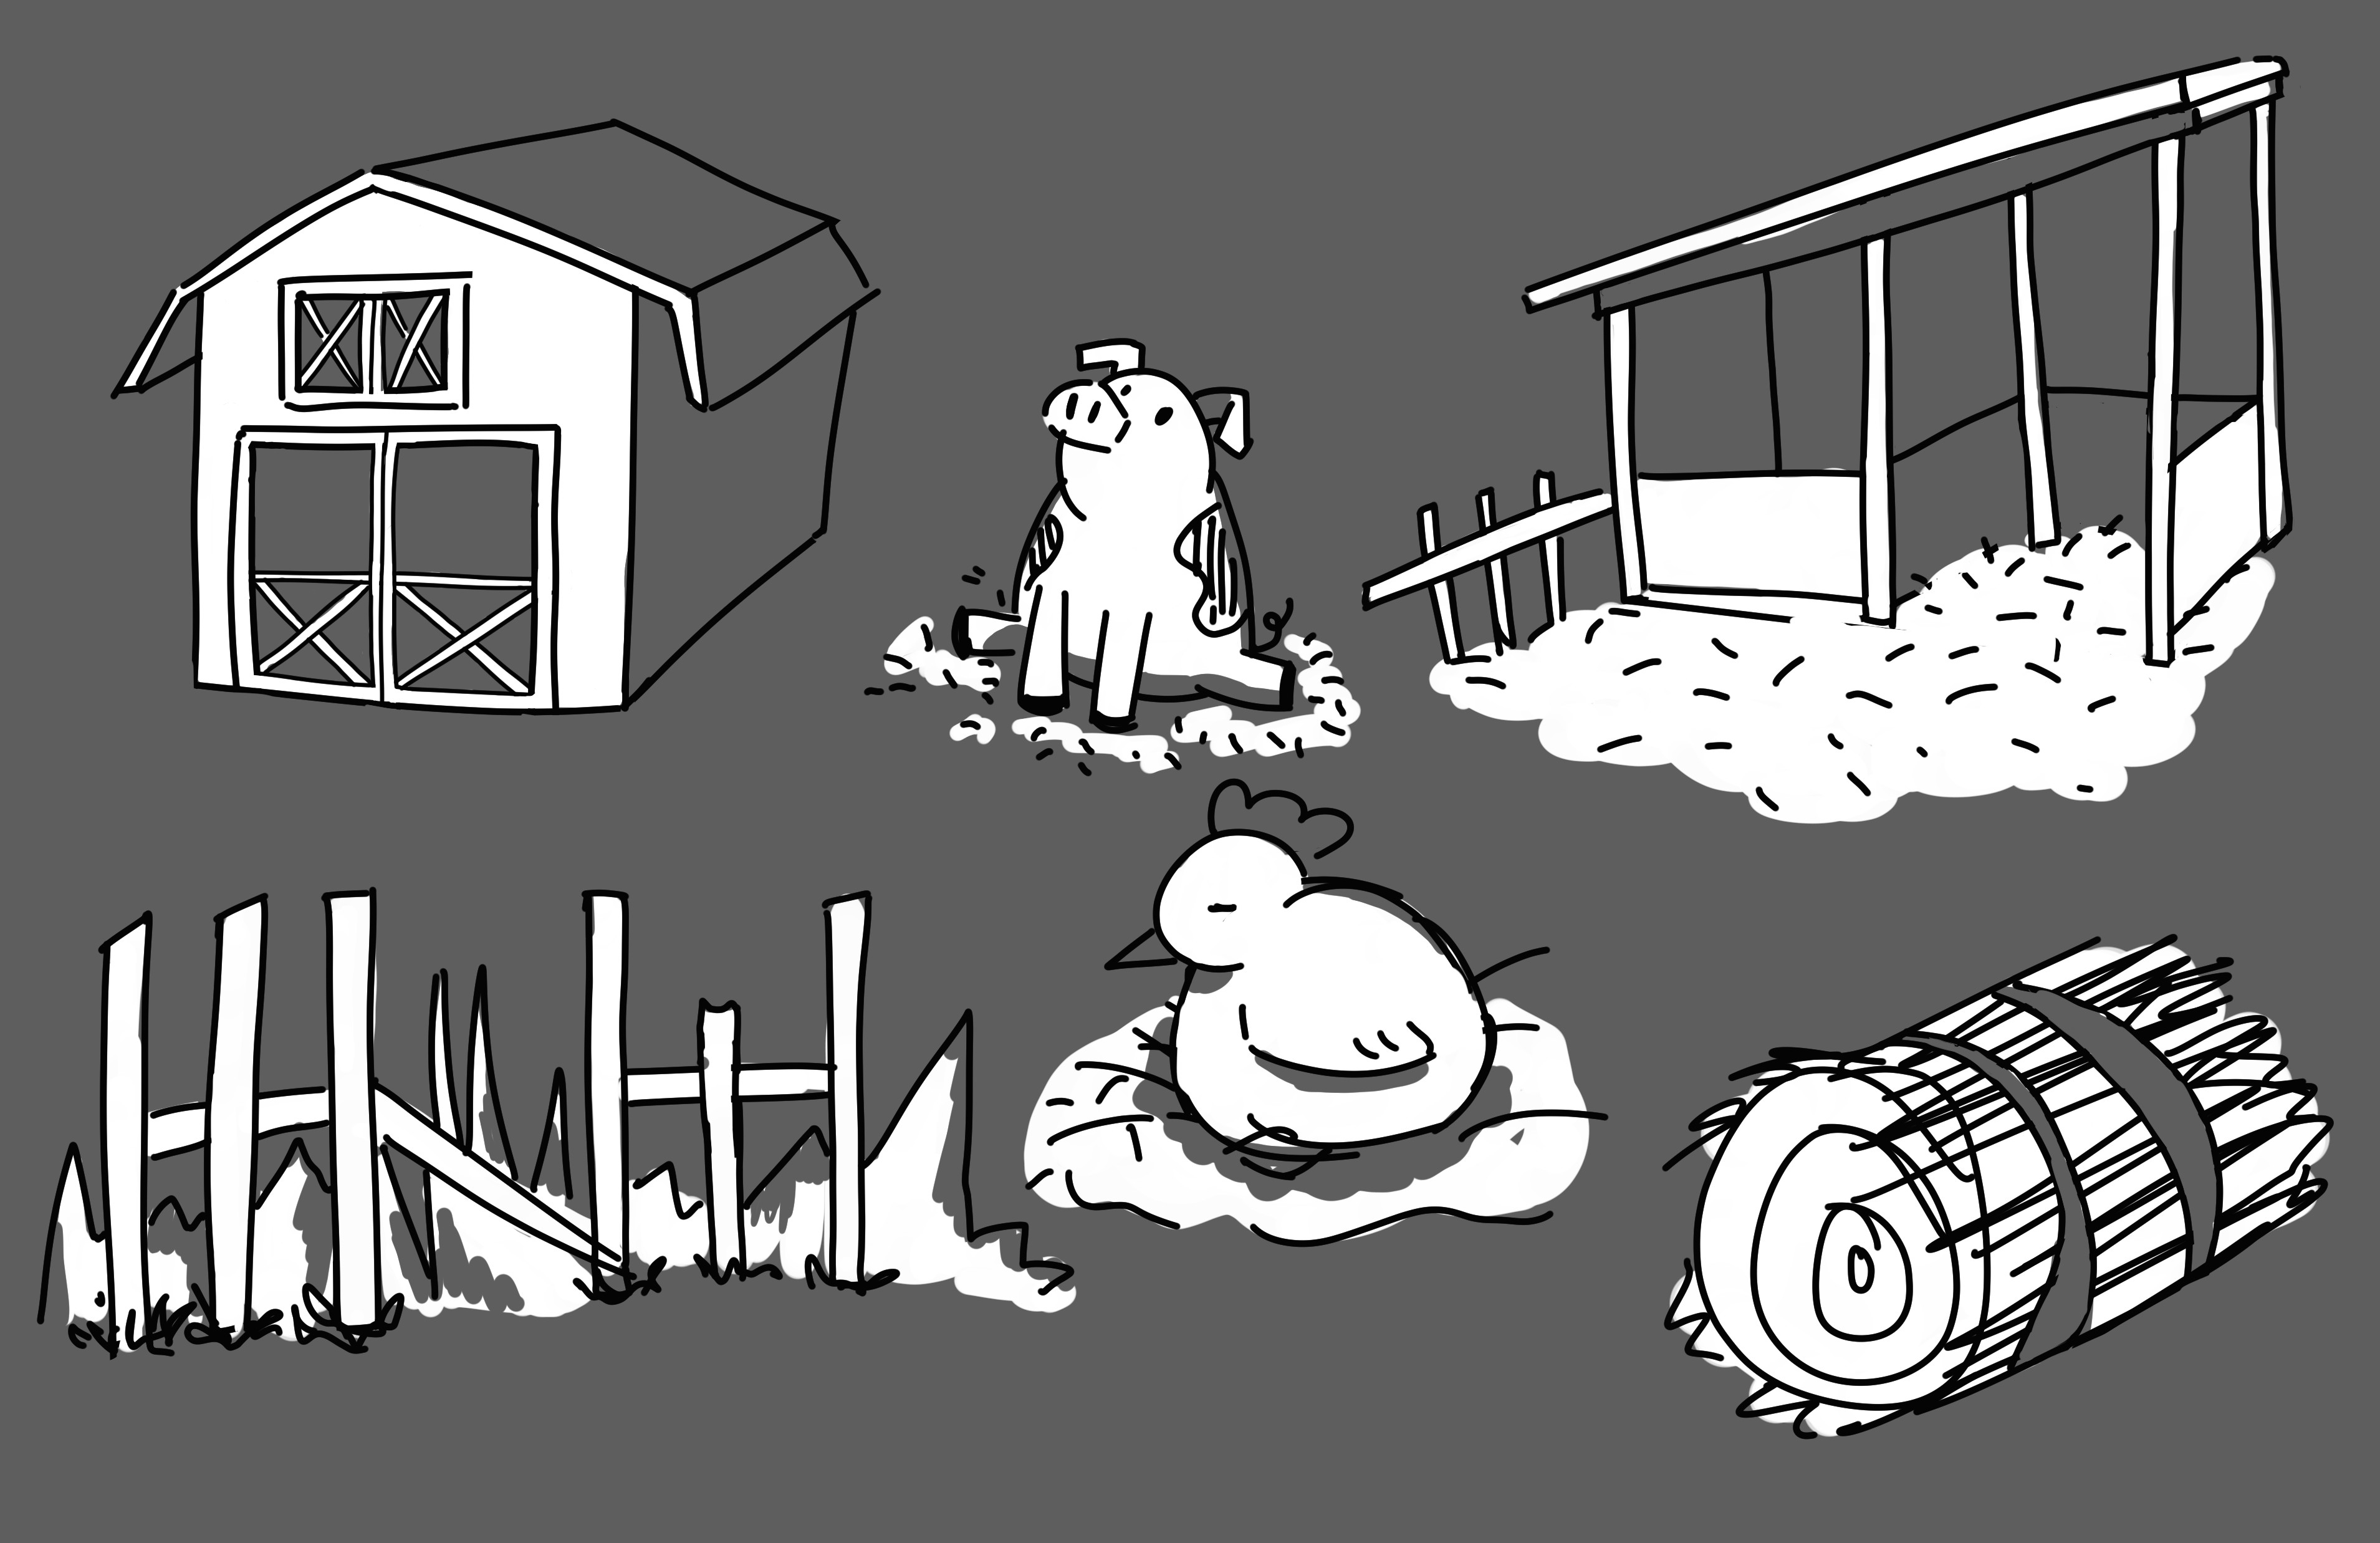 Beach Day Studios
Assets for a farm inspired level